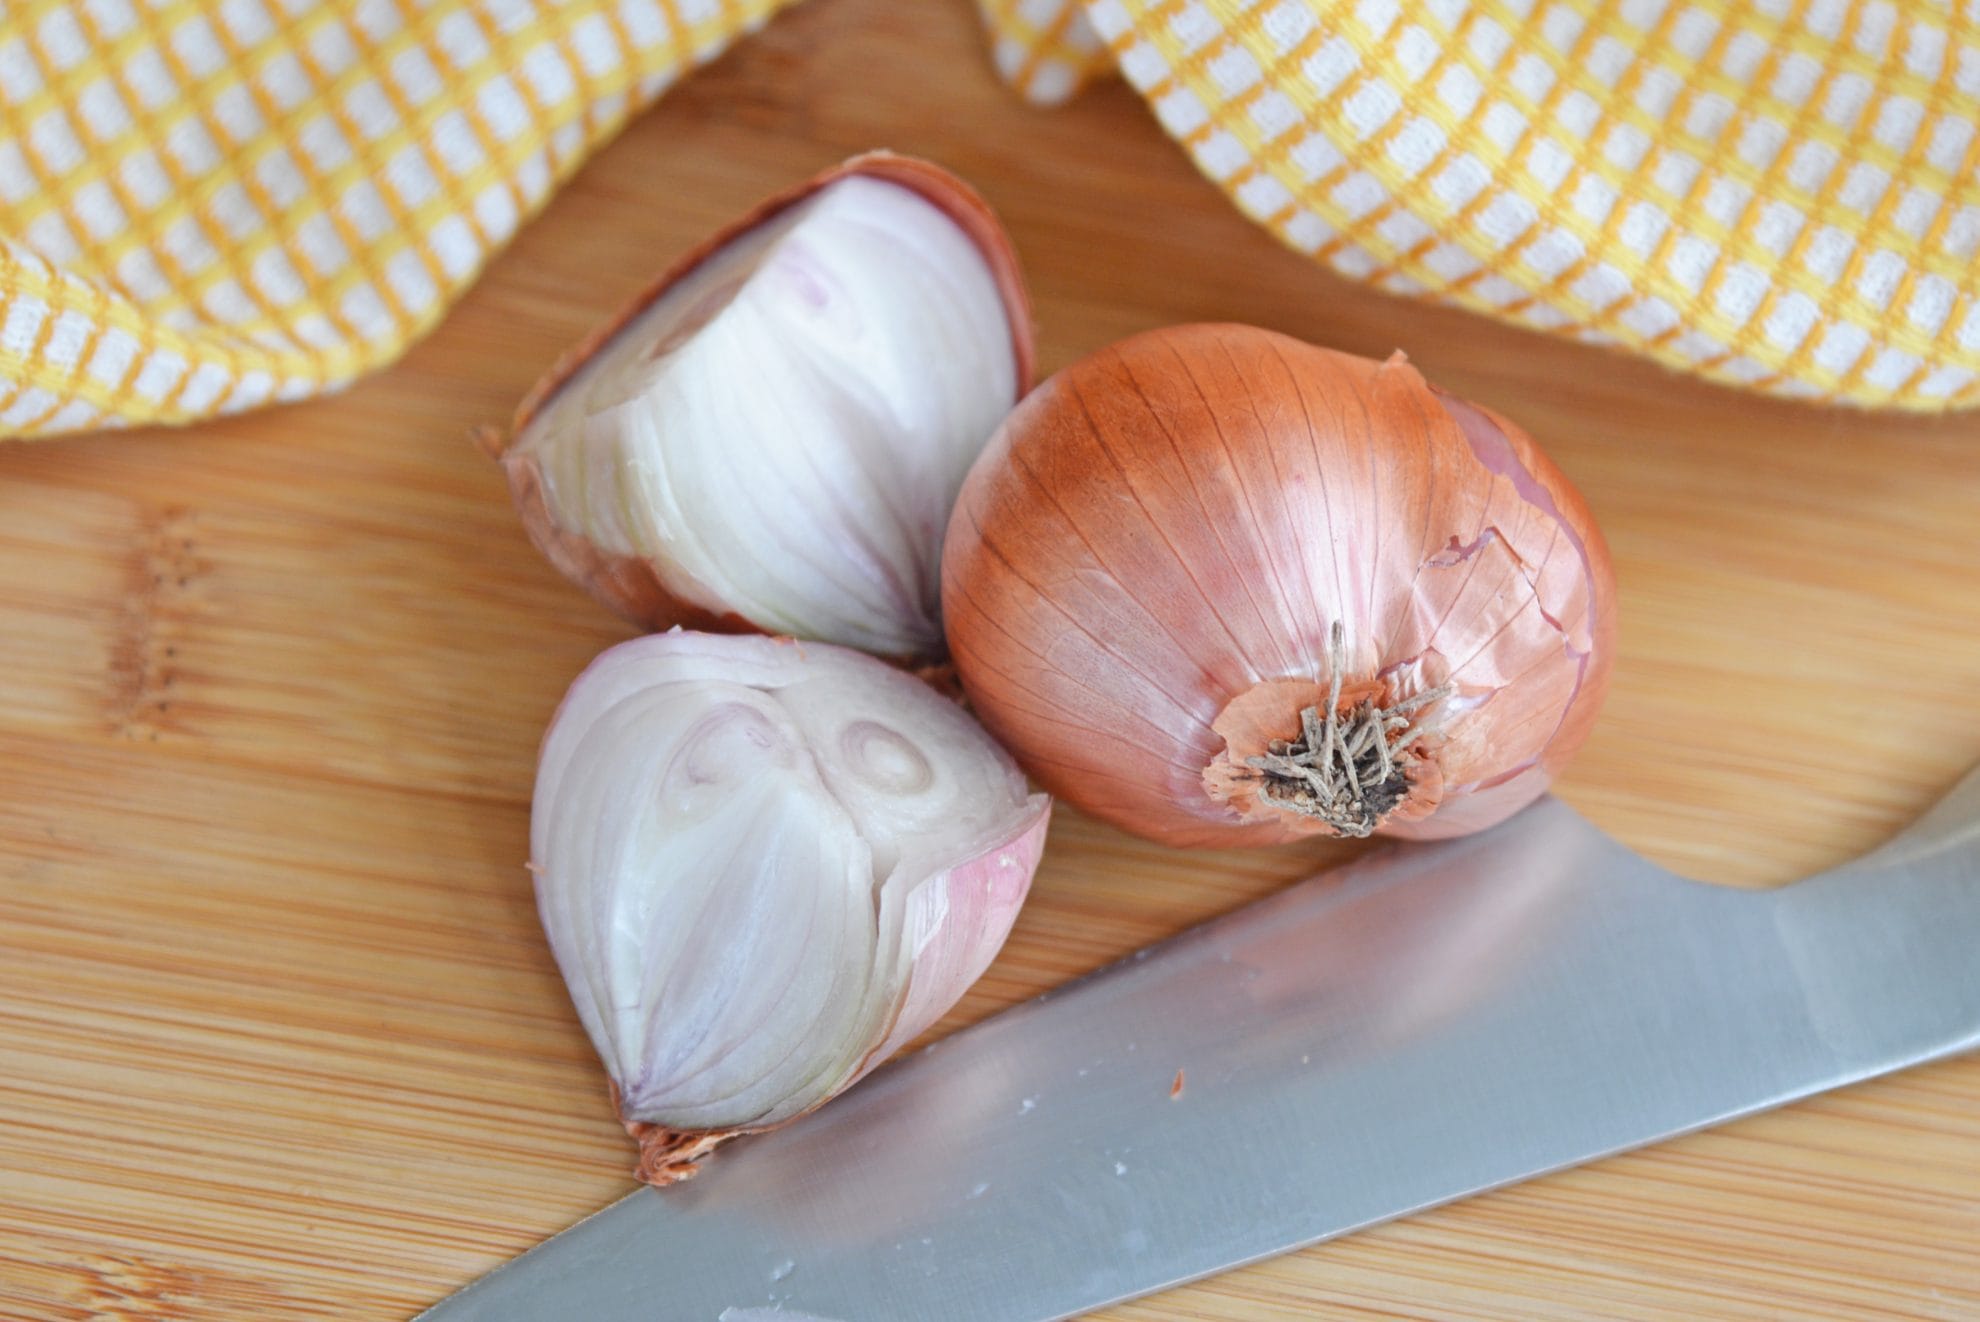 What Are Shallots And What Do They Taste Like?